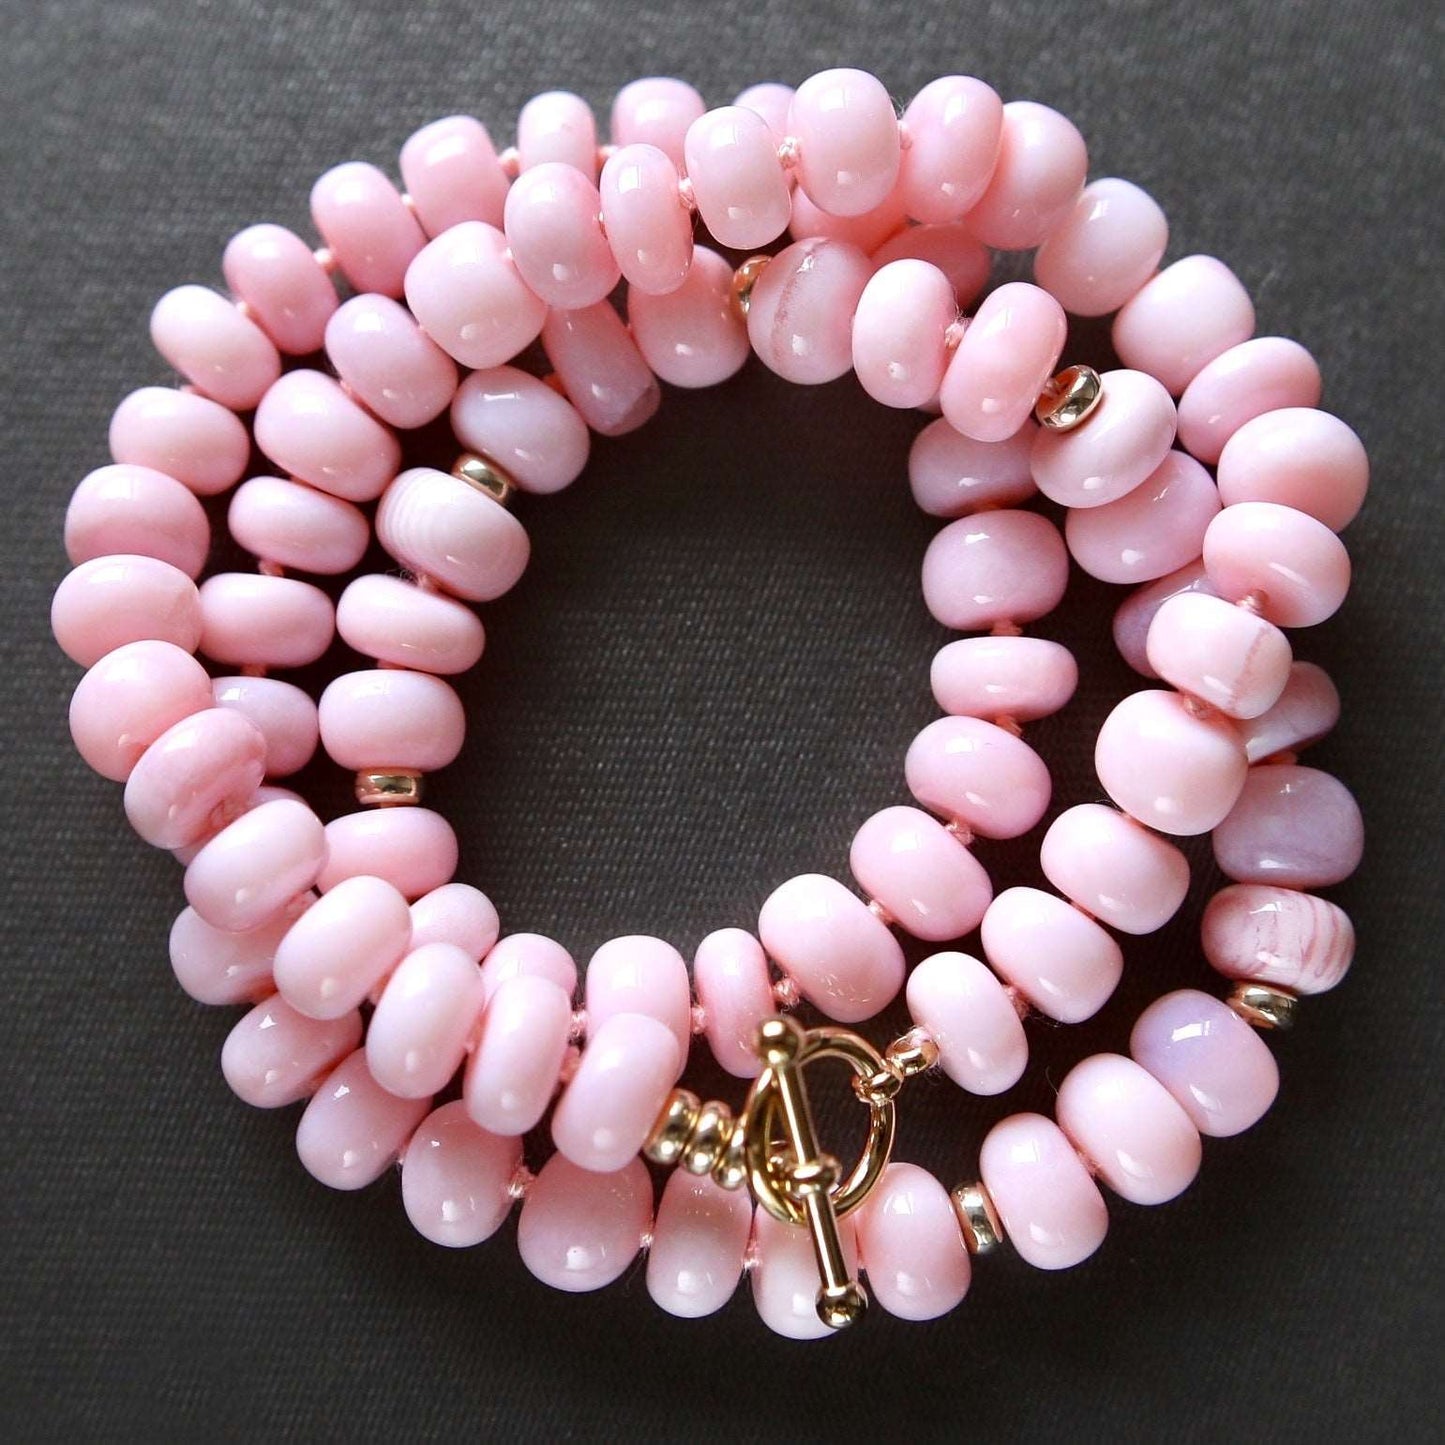 Pink Opal Bracelet/Necklace with Yellow Gold Toggle Clasp